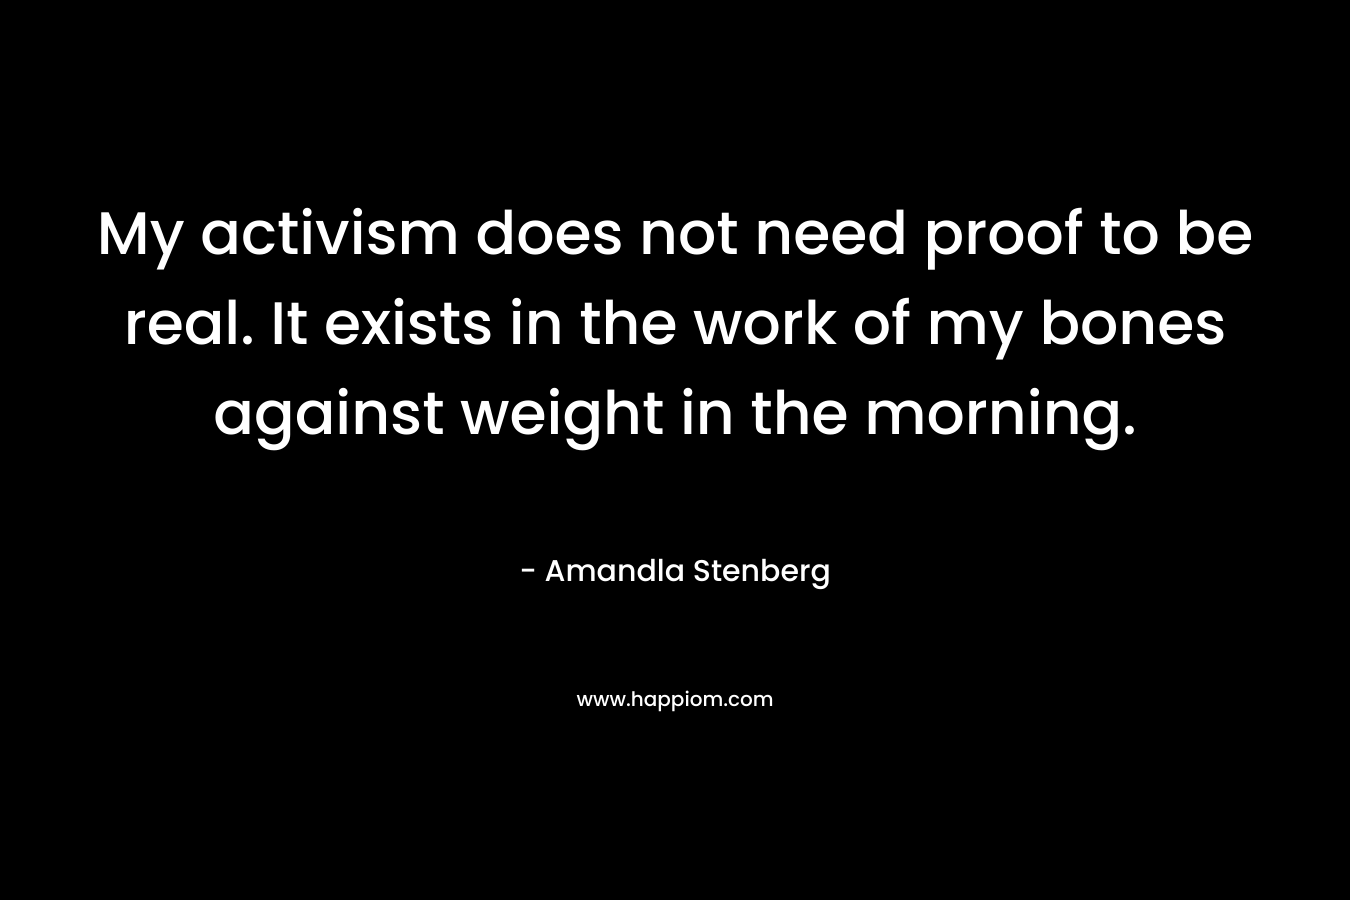 My activism does not need proof to be real. It exists in the work of my bones against weight in the morning. – Amandla Stenberg